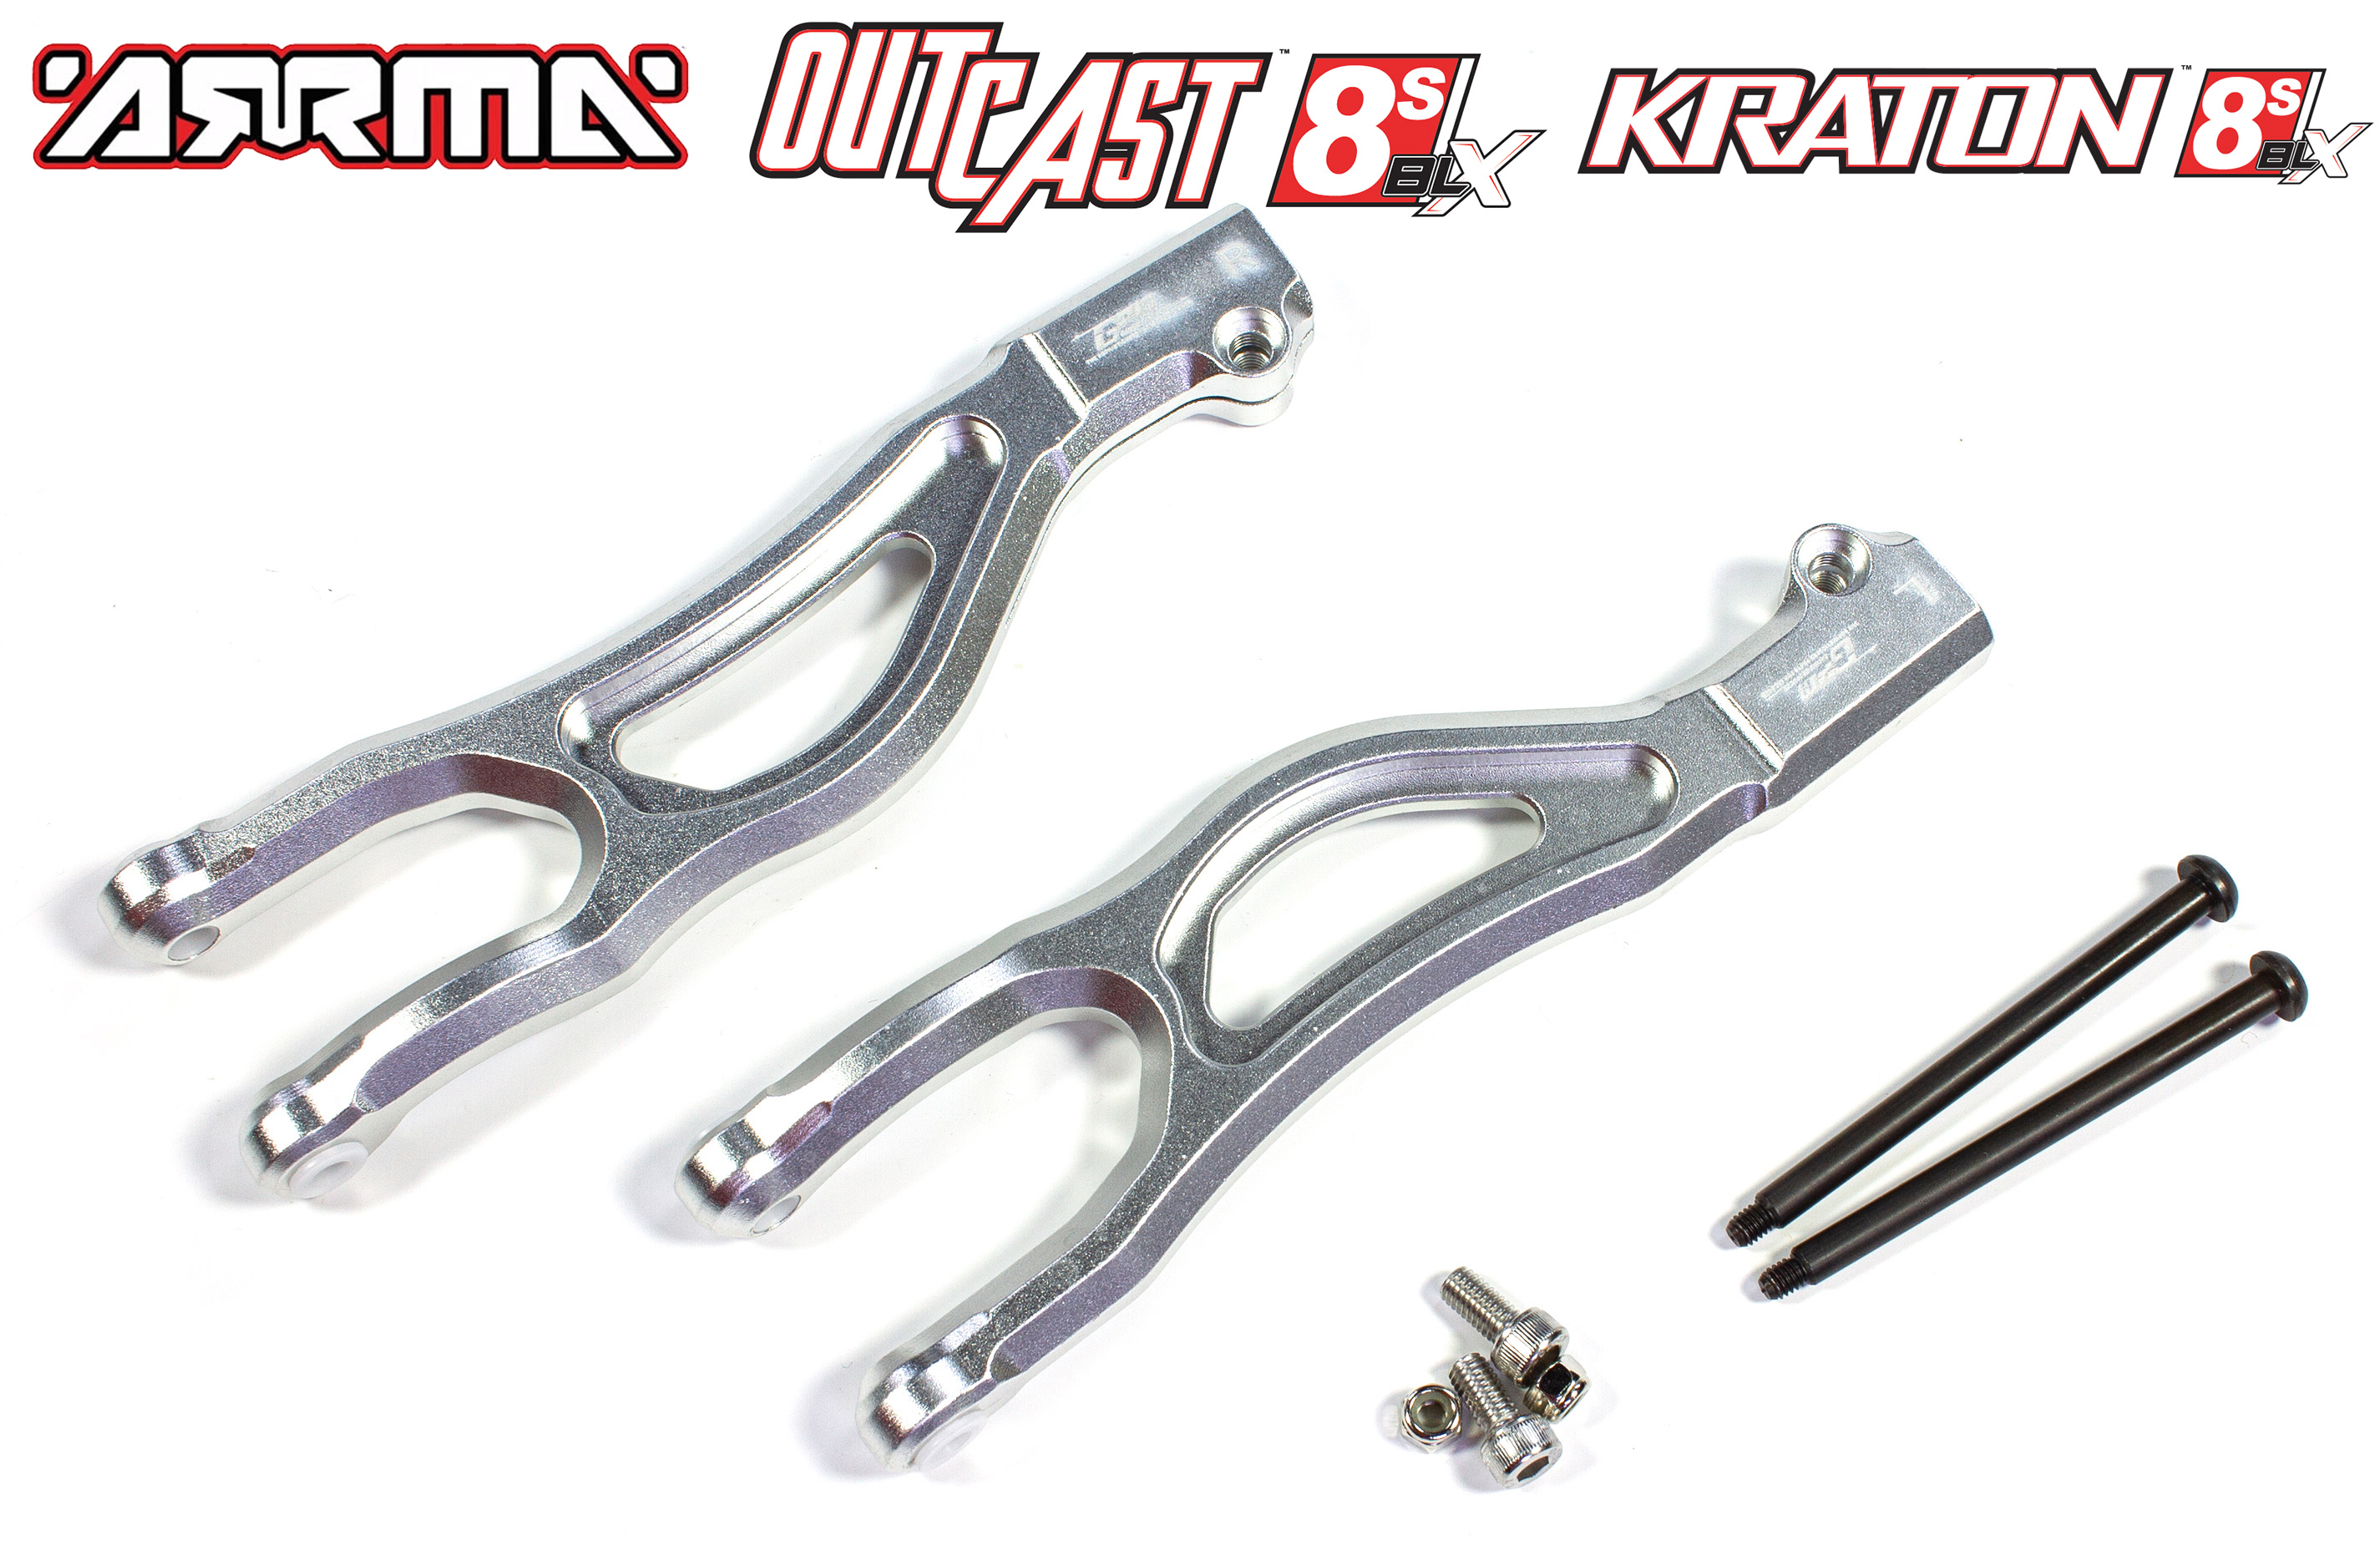 AKX054 GPM aluminum a-arms front upper for Arrma Kraton / Outcast 8S